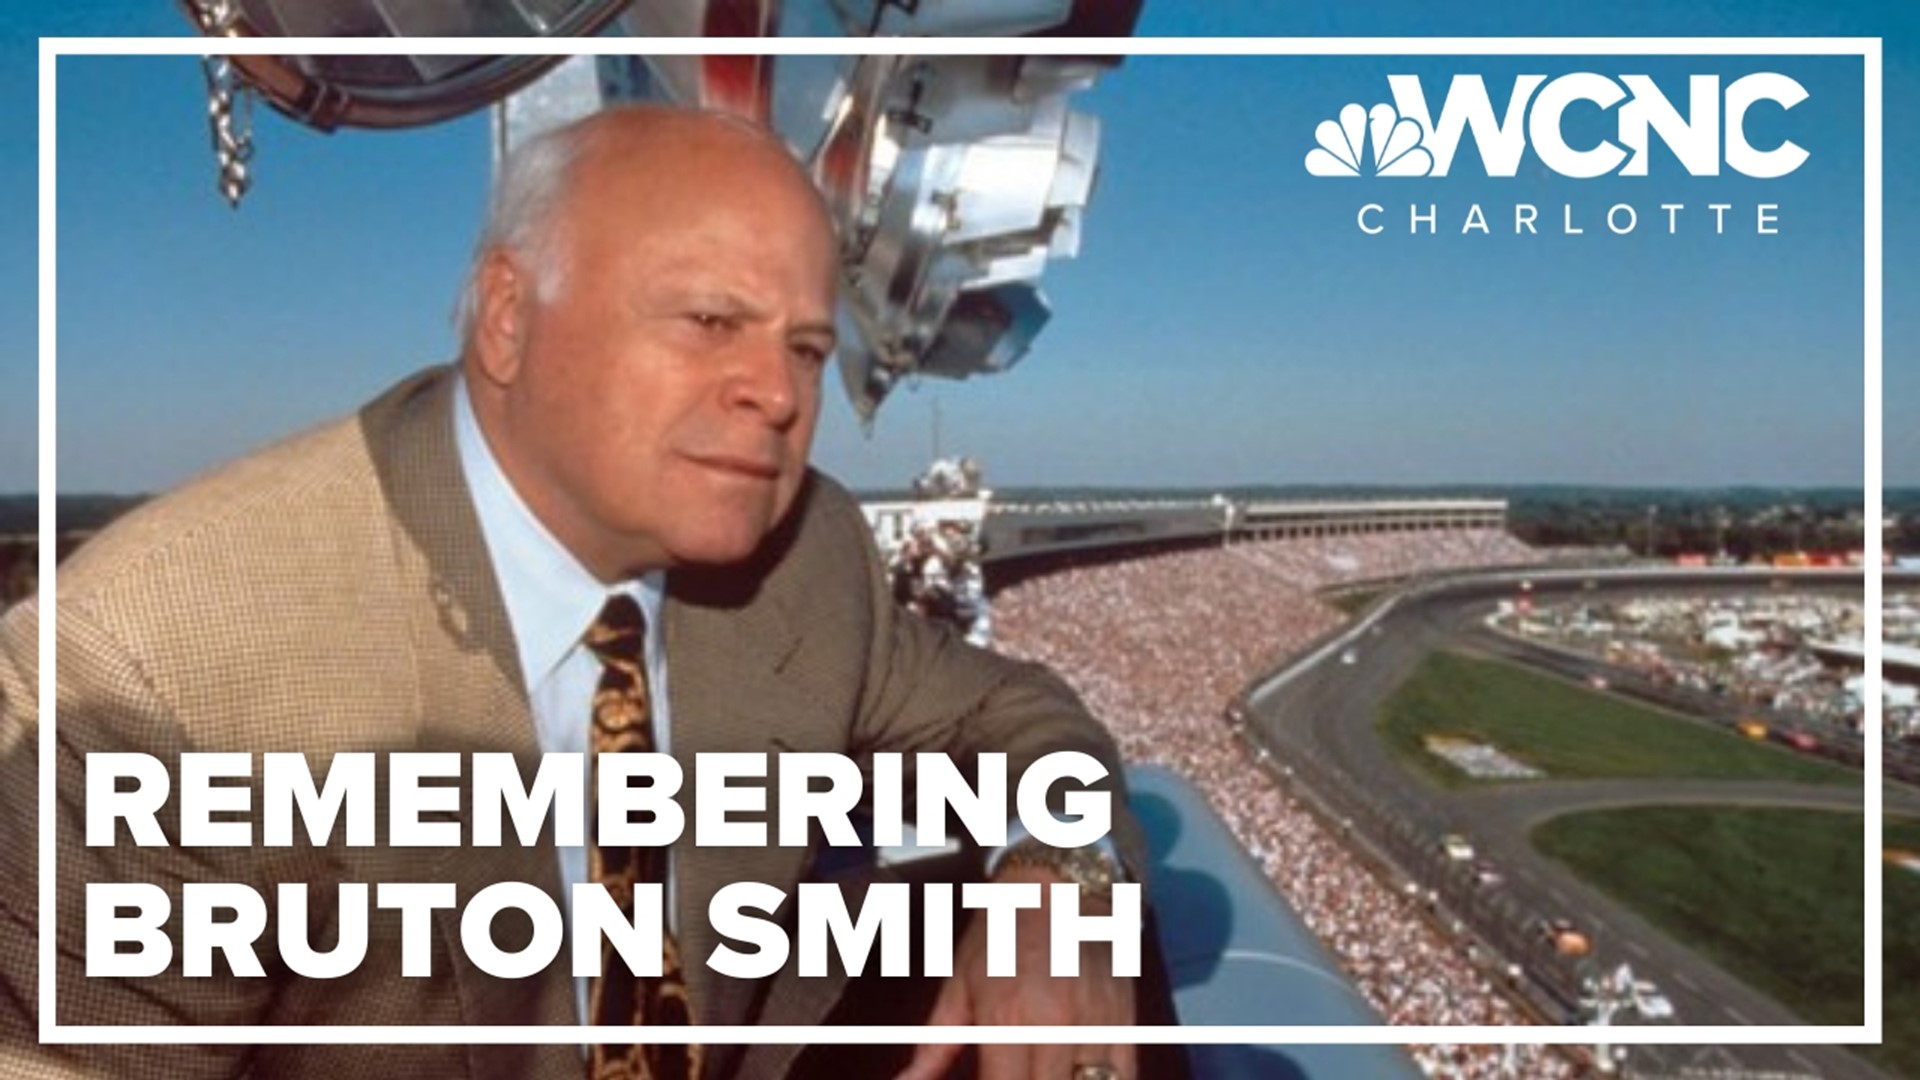 A final goodbye to a pioneer in the NASCAR world. Friends and family gathered to honor Bruton Smith. Smith died last week at the age of 95.